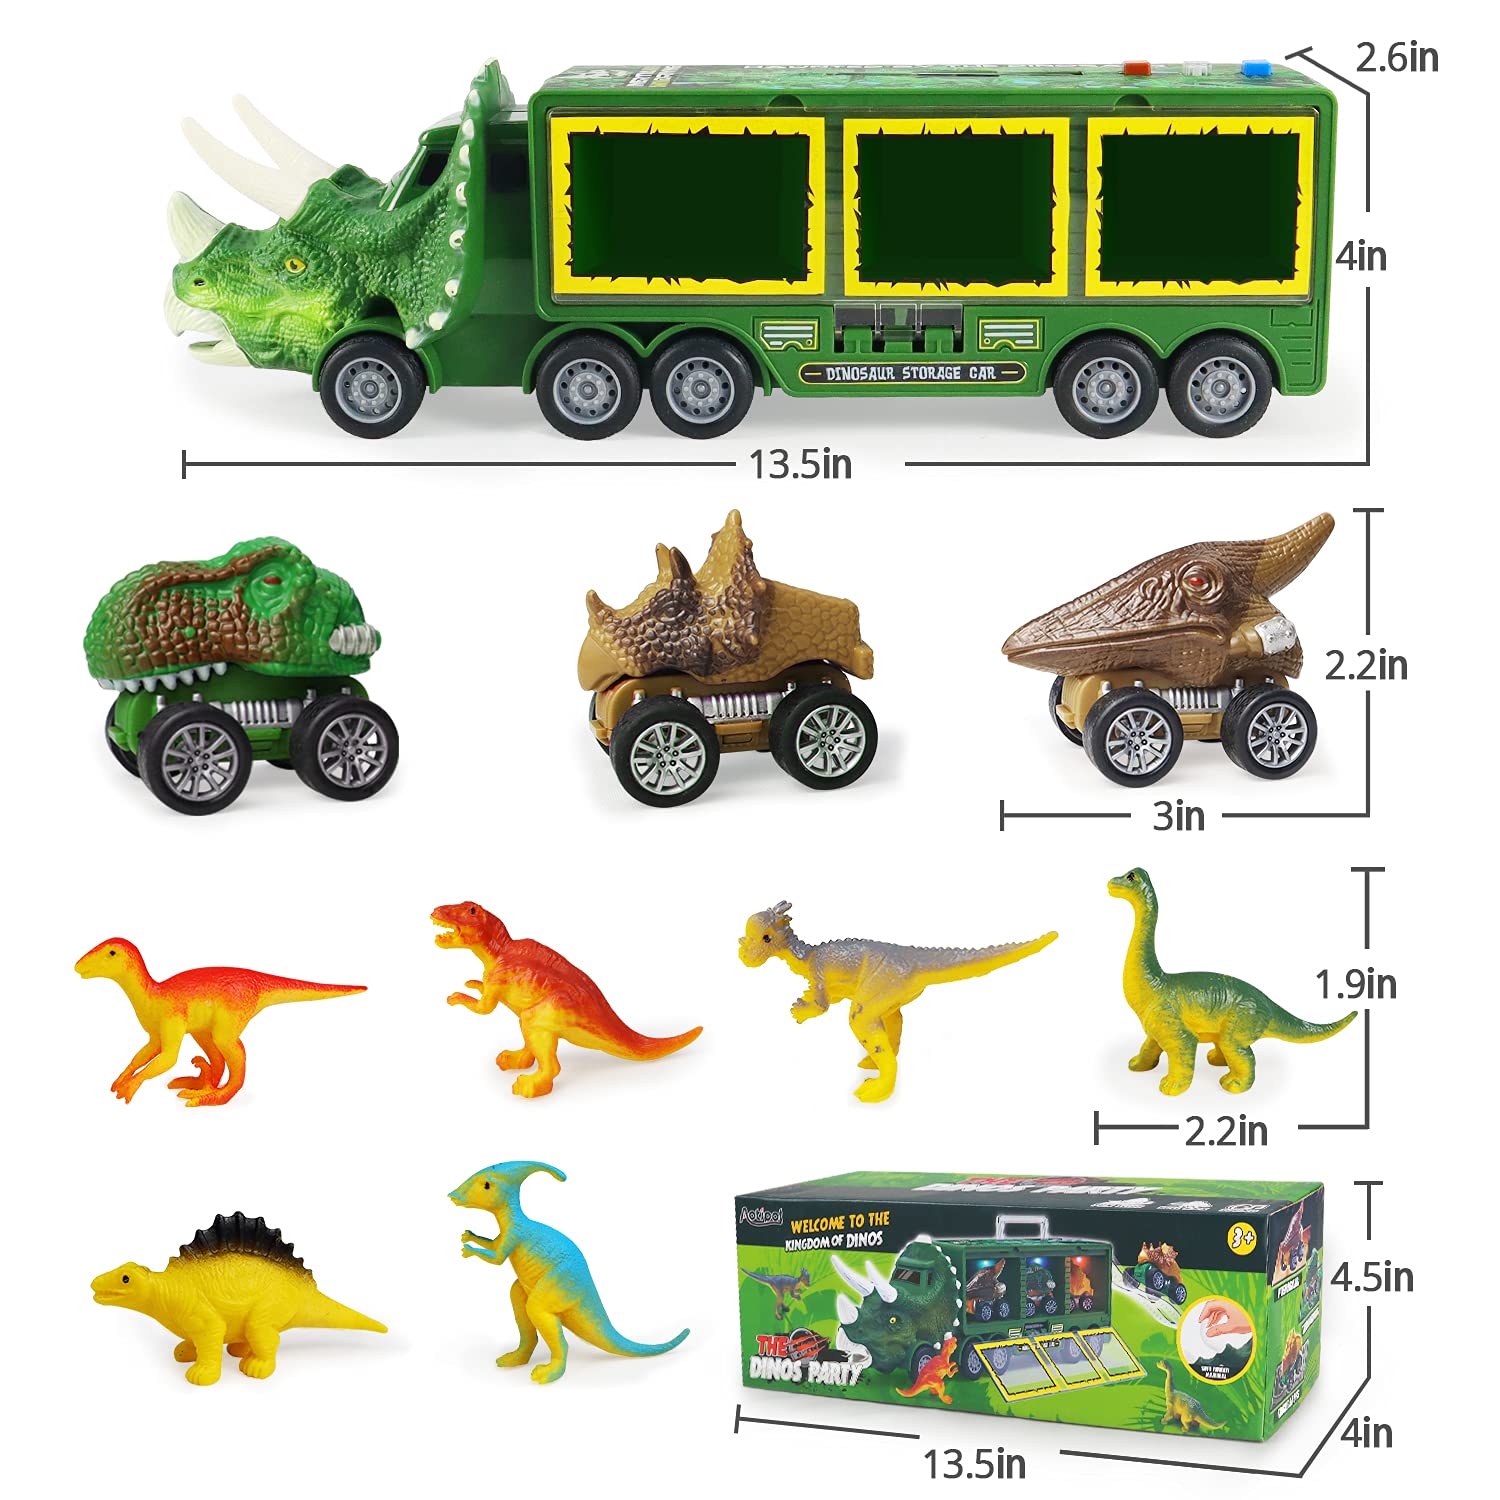 Dinosaur Toy Truck for Kids 3-7 with Flashing Lights, Music and Roaring Sound, 10 in 1 Dinosaur Toys for Boys and Girls, 3 Pull Back Dinosaur Cars, 6 Dinosaur Toys and 1 Dinosaur Carrier Truck